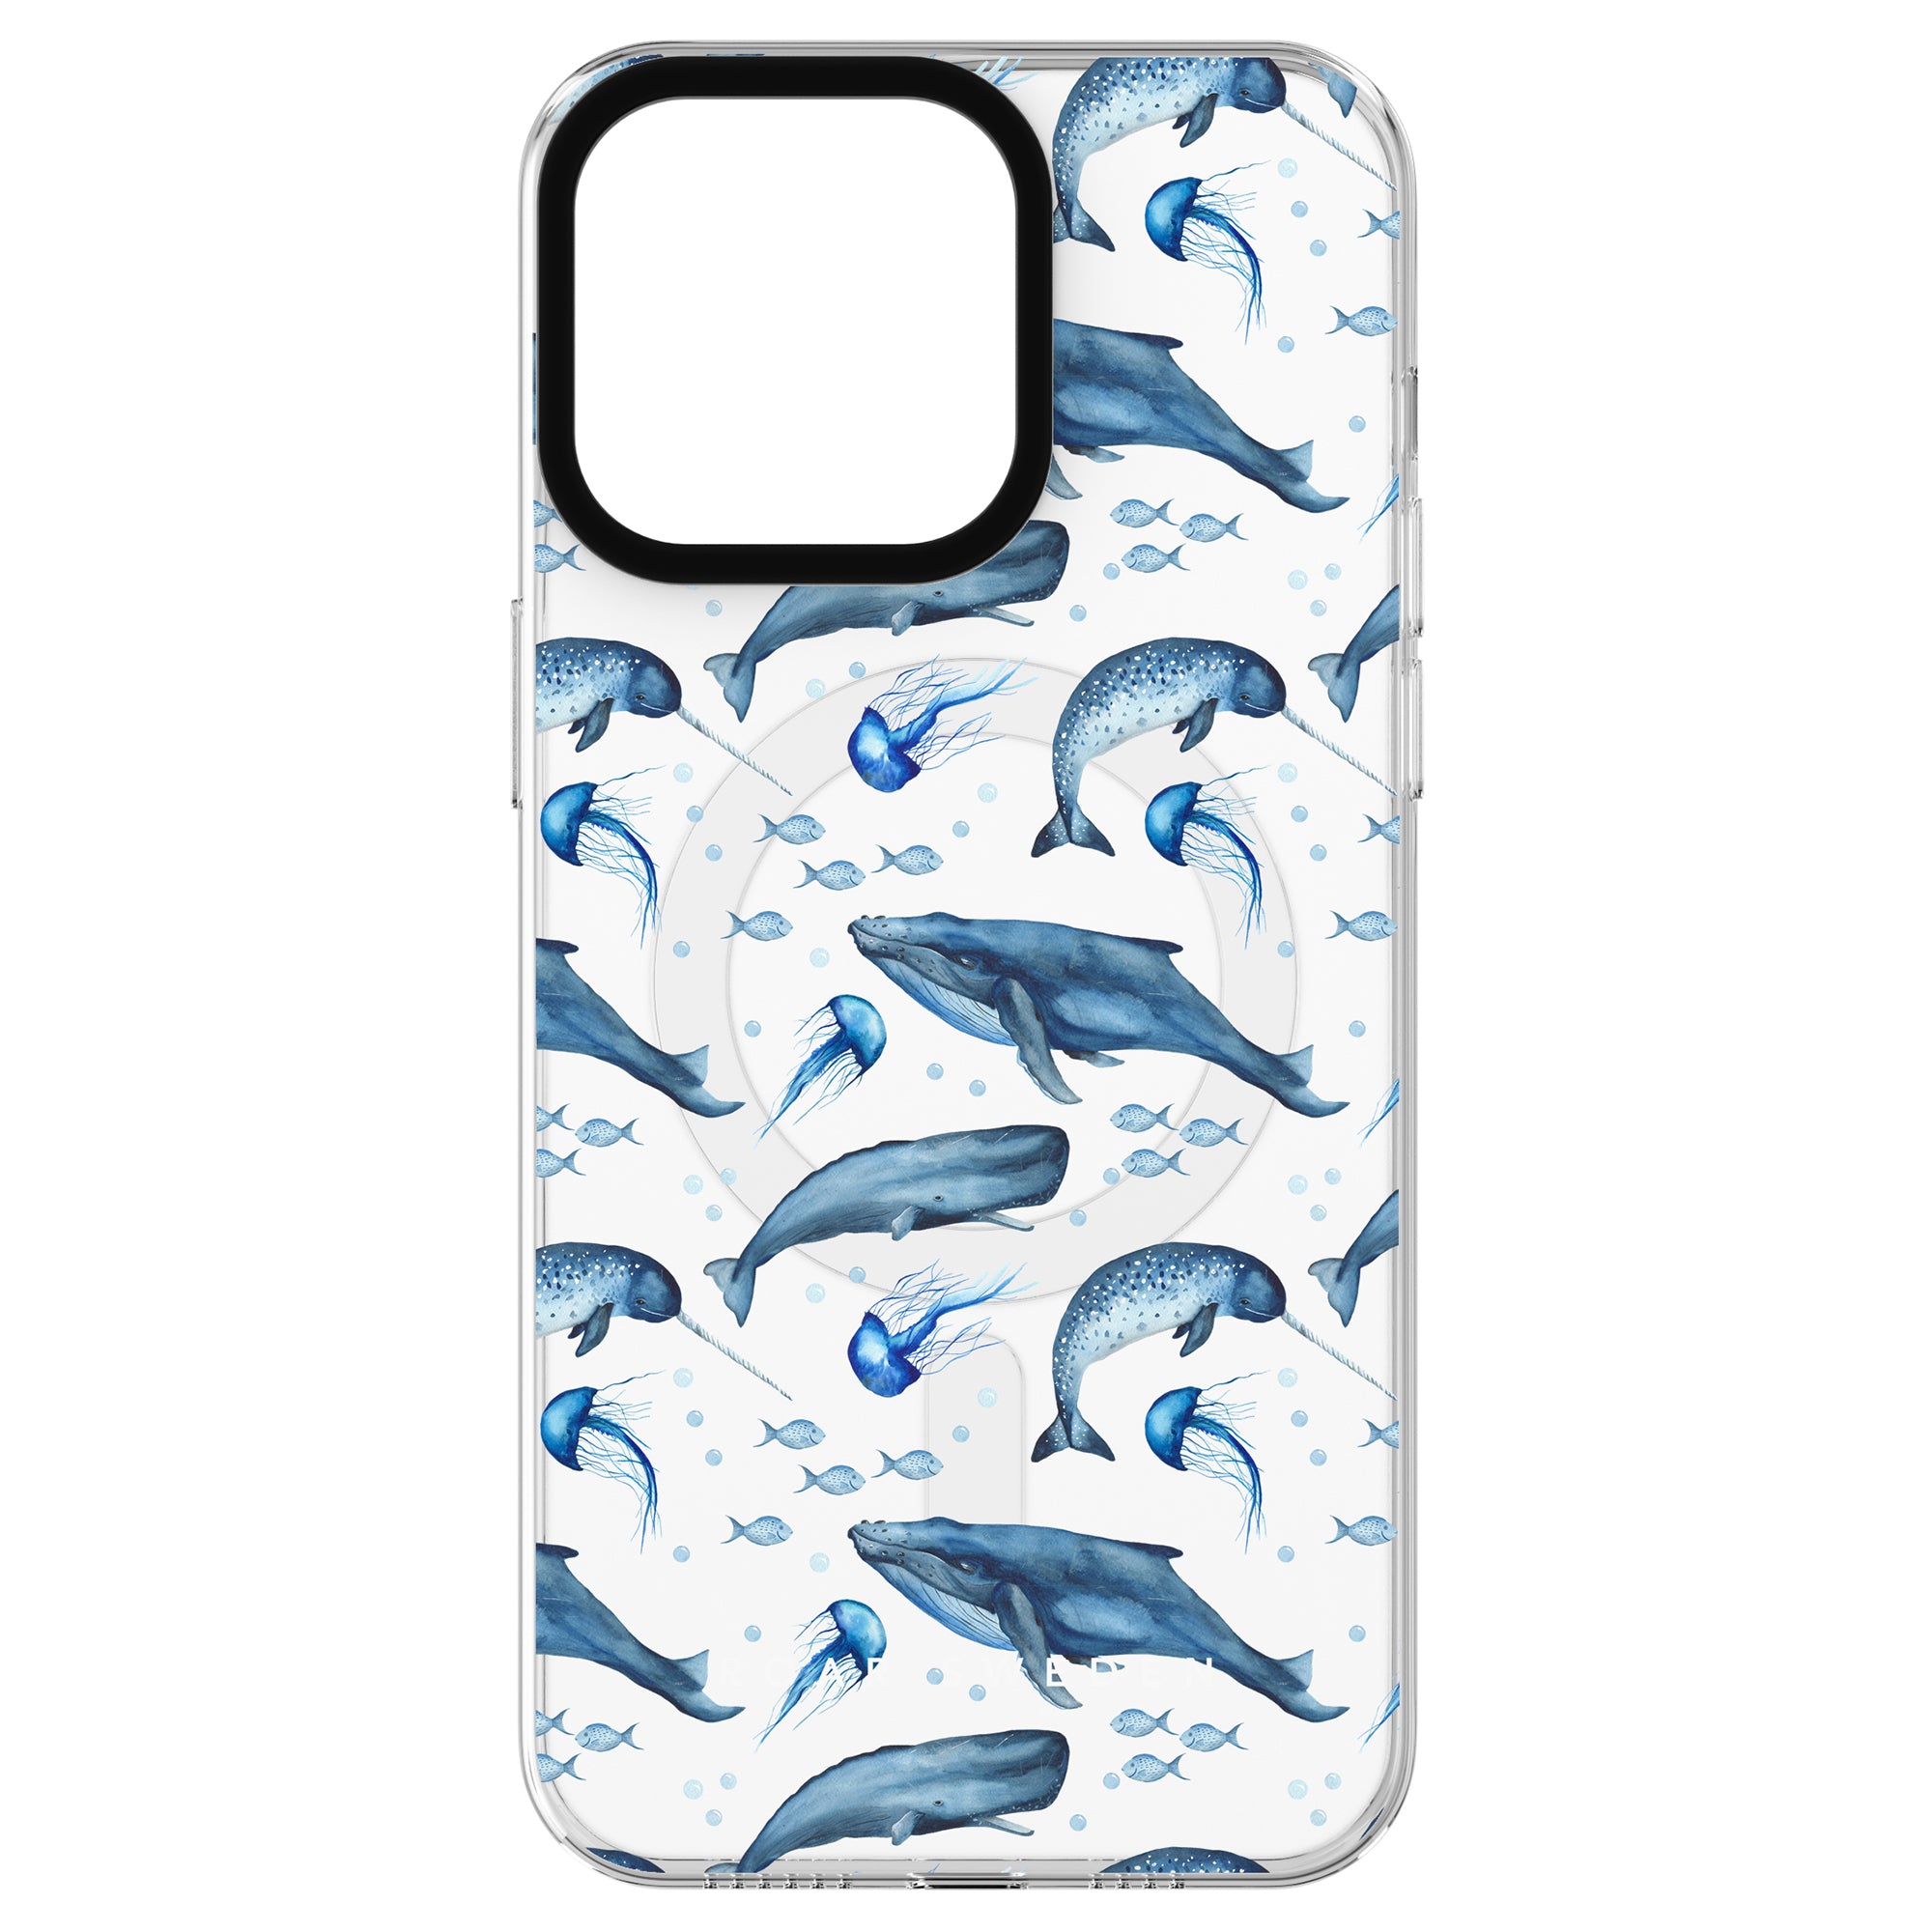 Introducing the Cetacea - MagSafe Case, featuring a stunning pattern of blue whales, jellyfish, and fish. Dive into undervattensvärldens skönhet while keeping your phone protected and stylish.